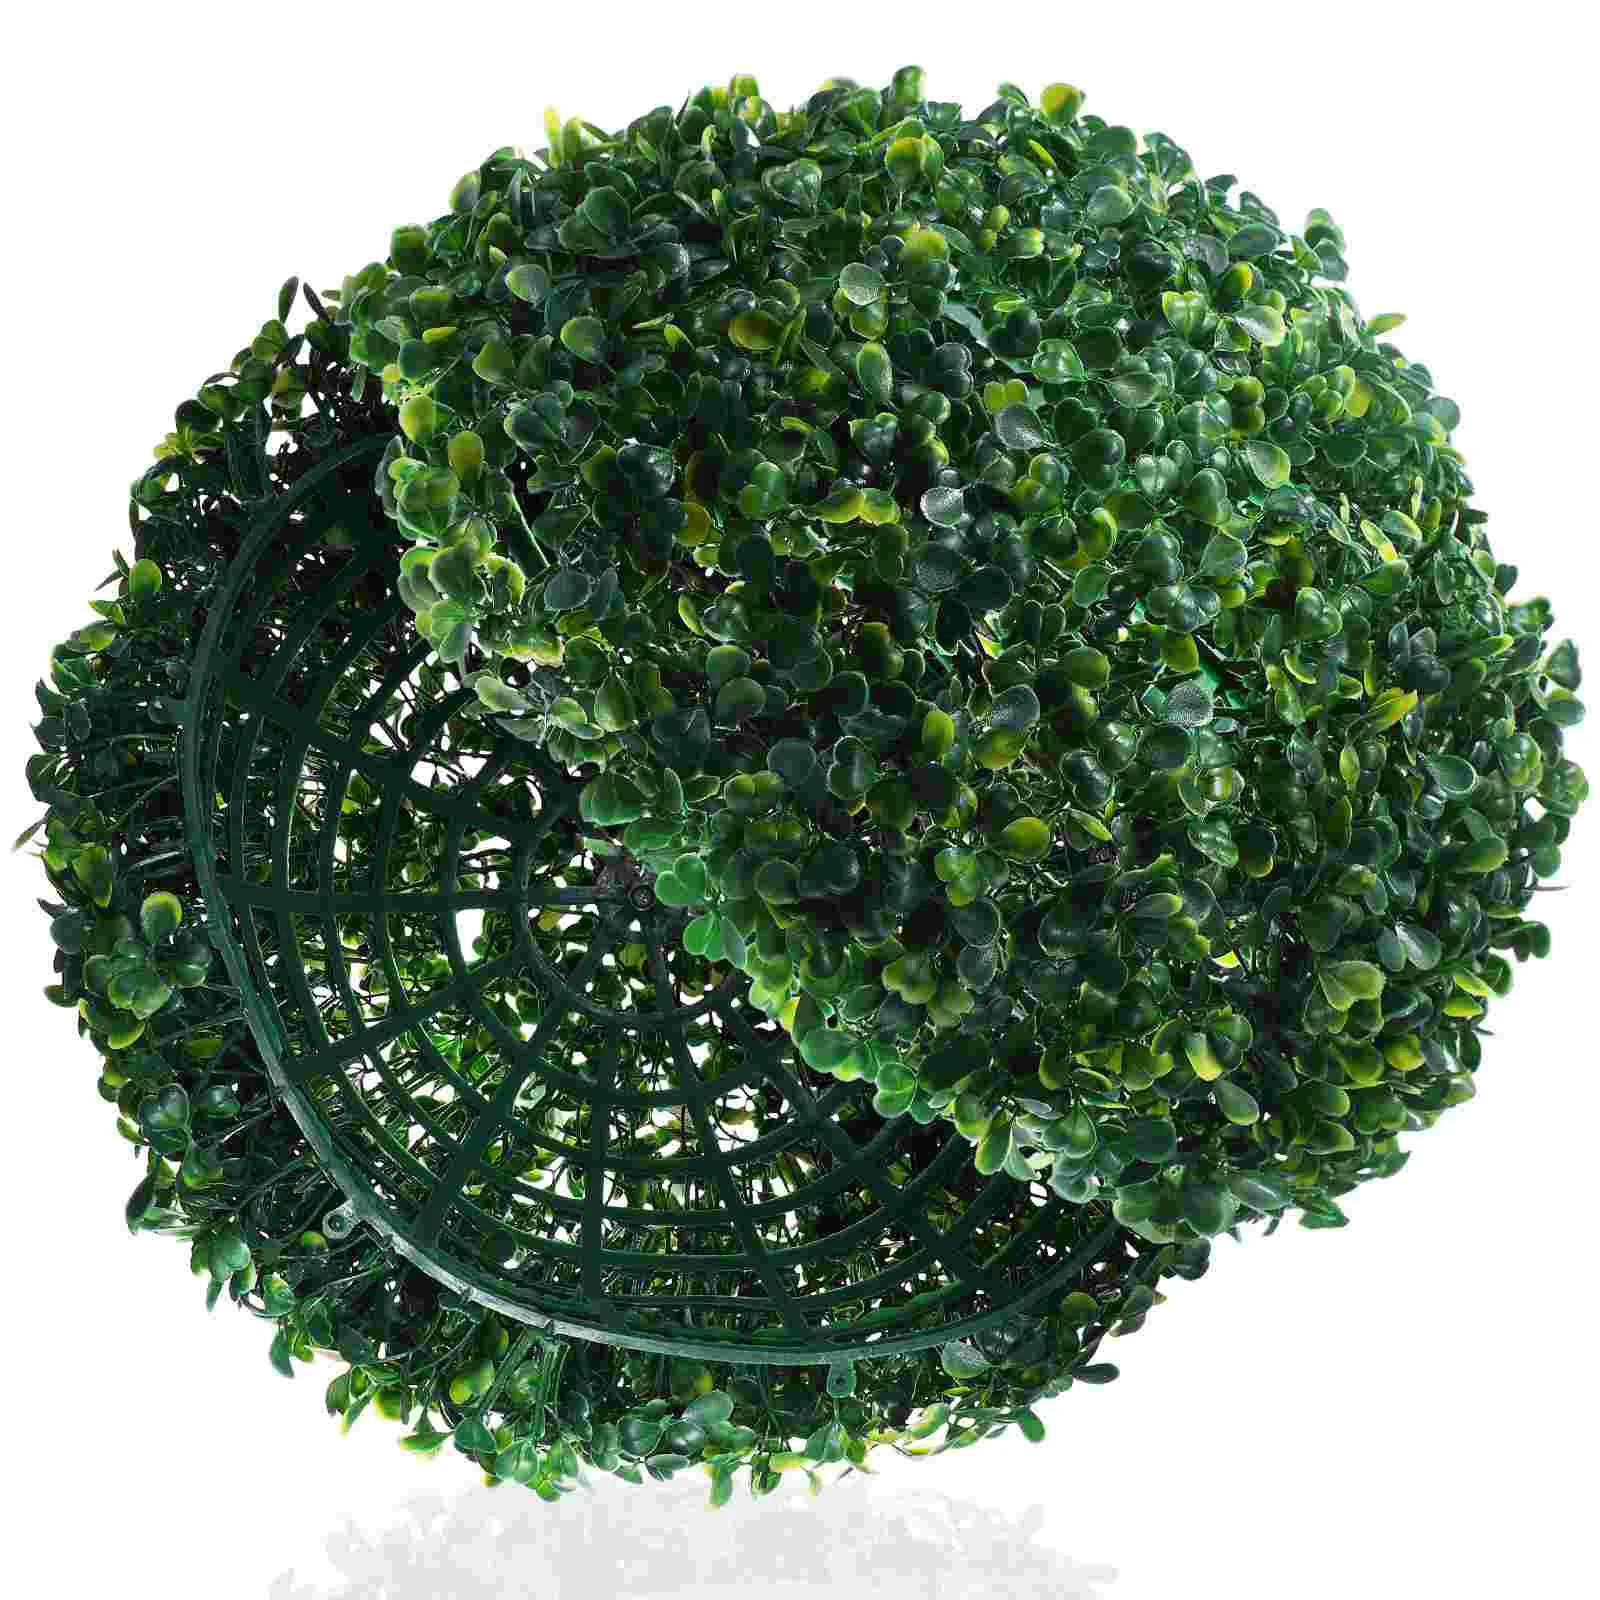 

Faux Plants Grass Ball Outdoor Christmas Decorations Simulated Topiary Balls